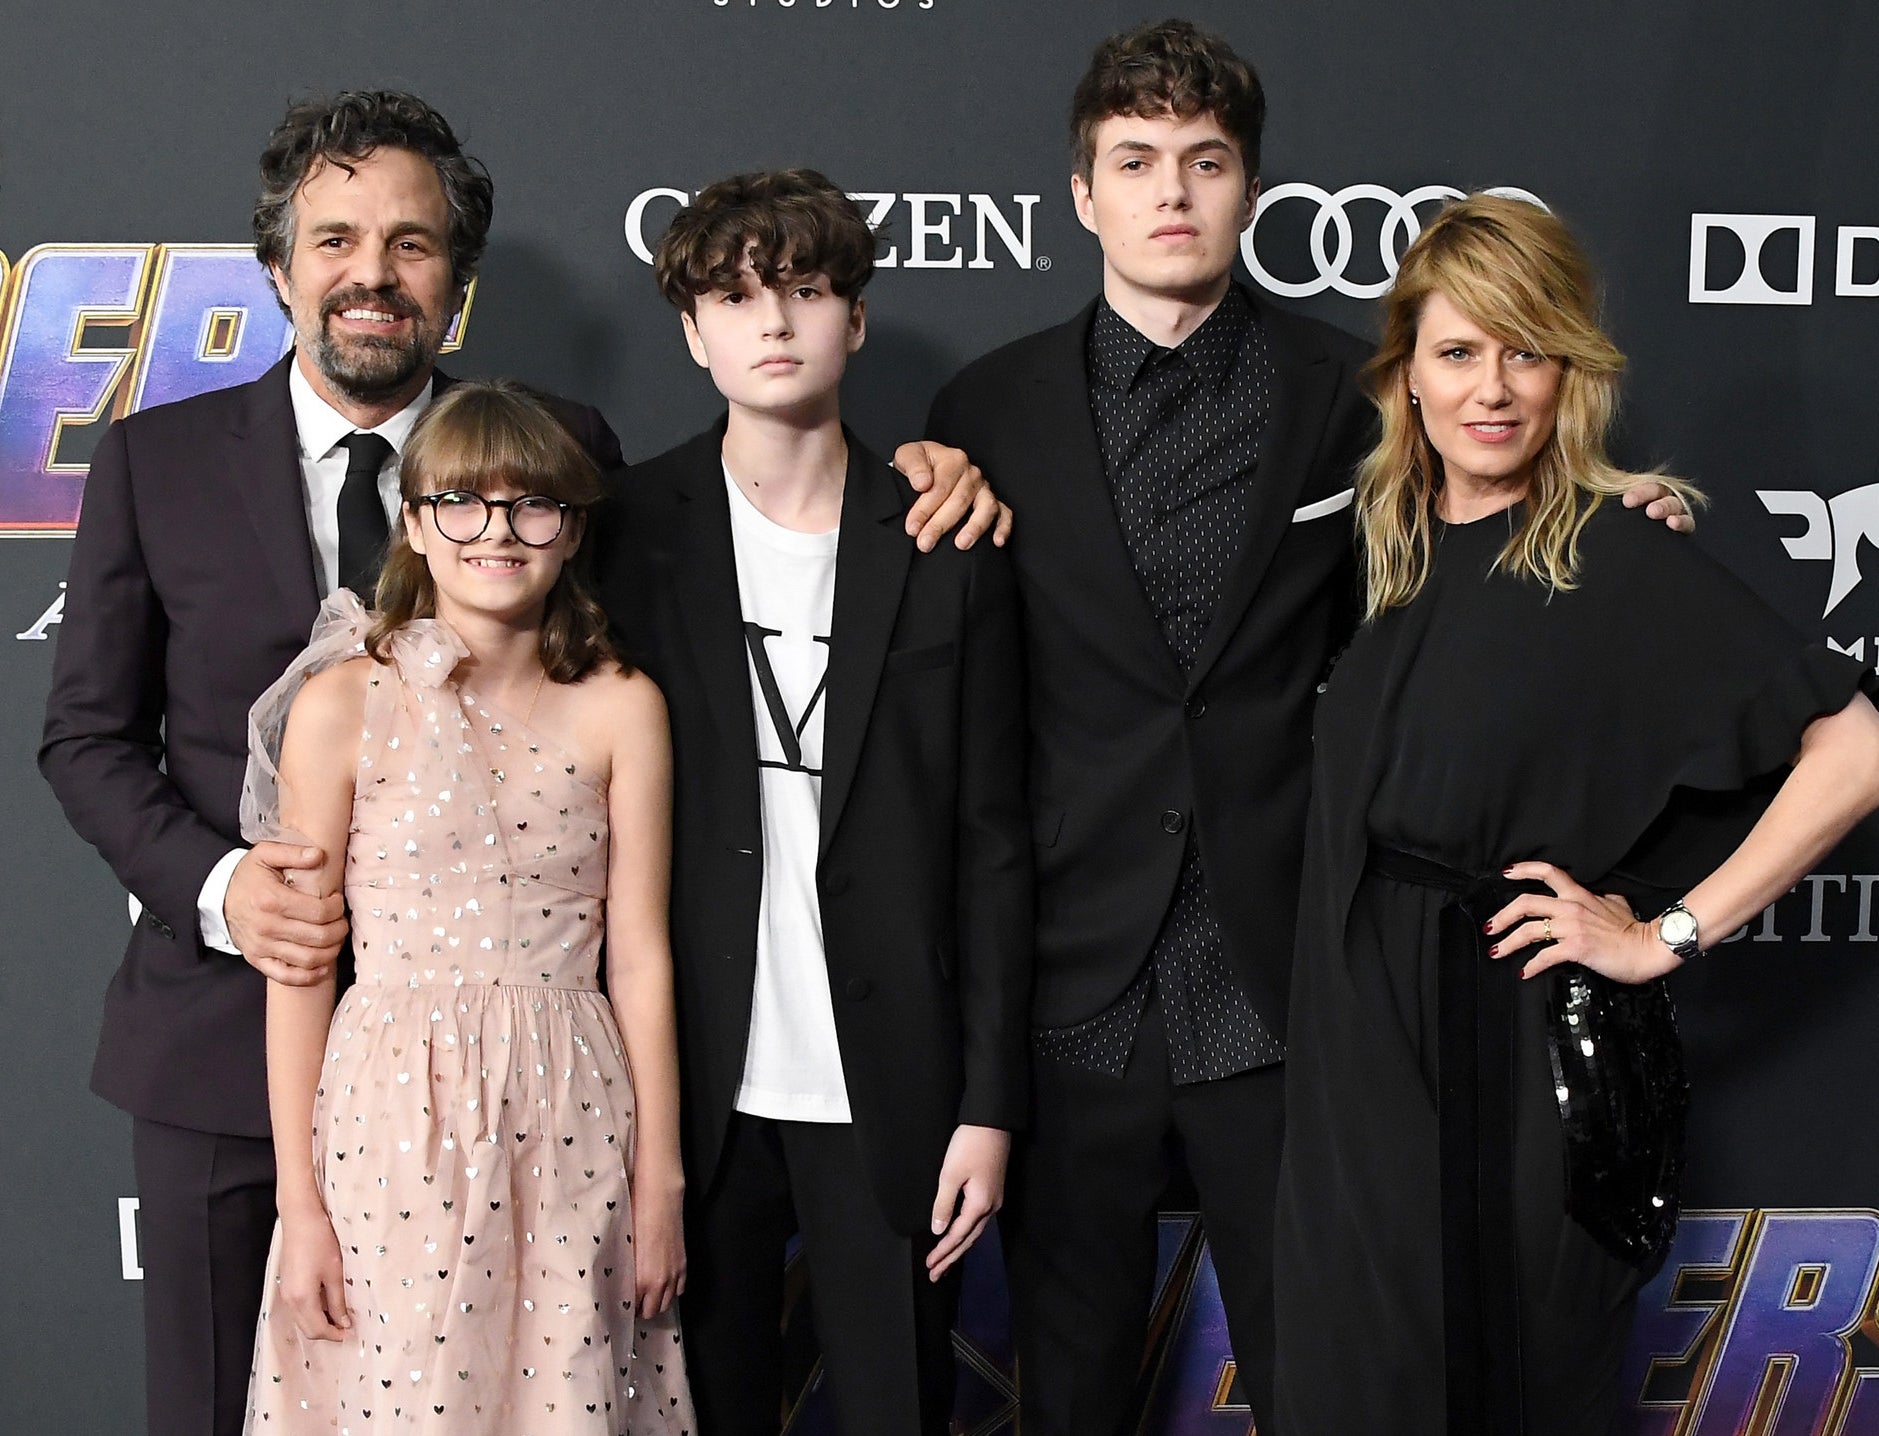 Mark and Sunrise pose with their children on a red carpet